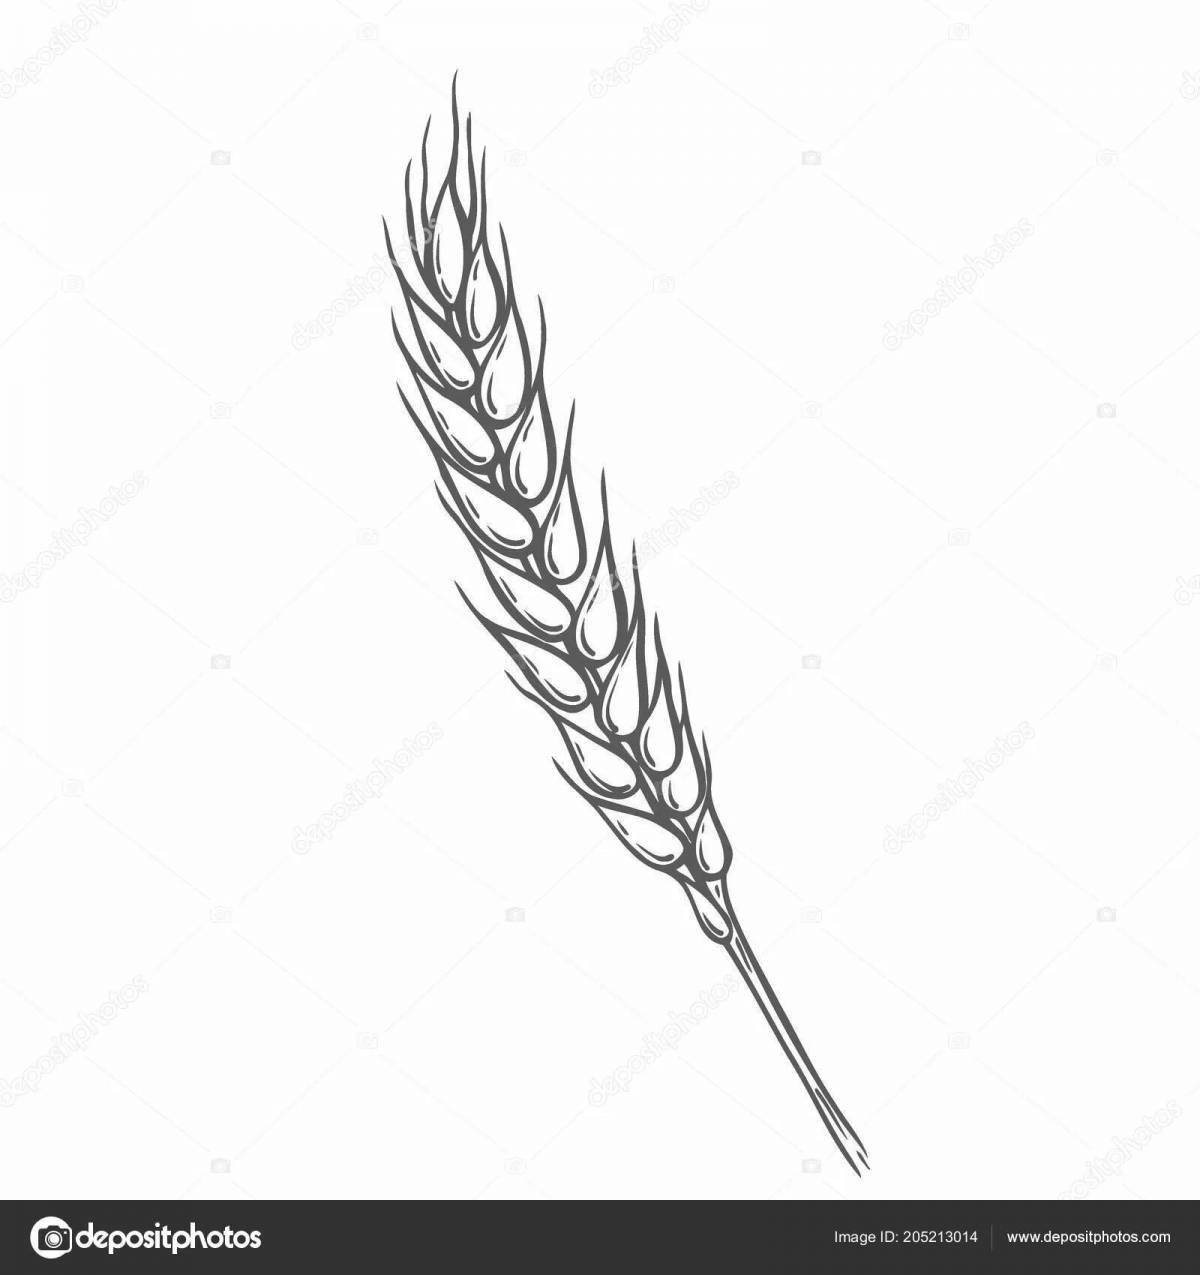 Coloring page wild ears of wheat